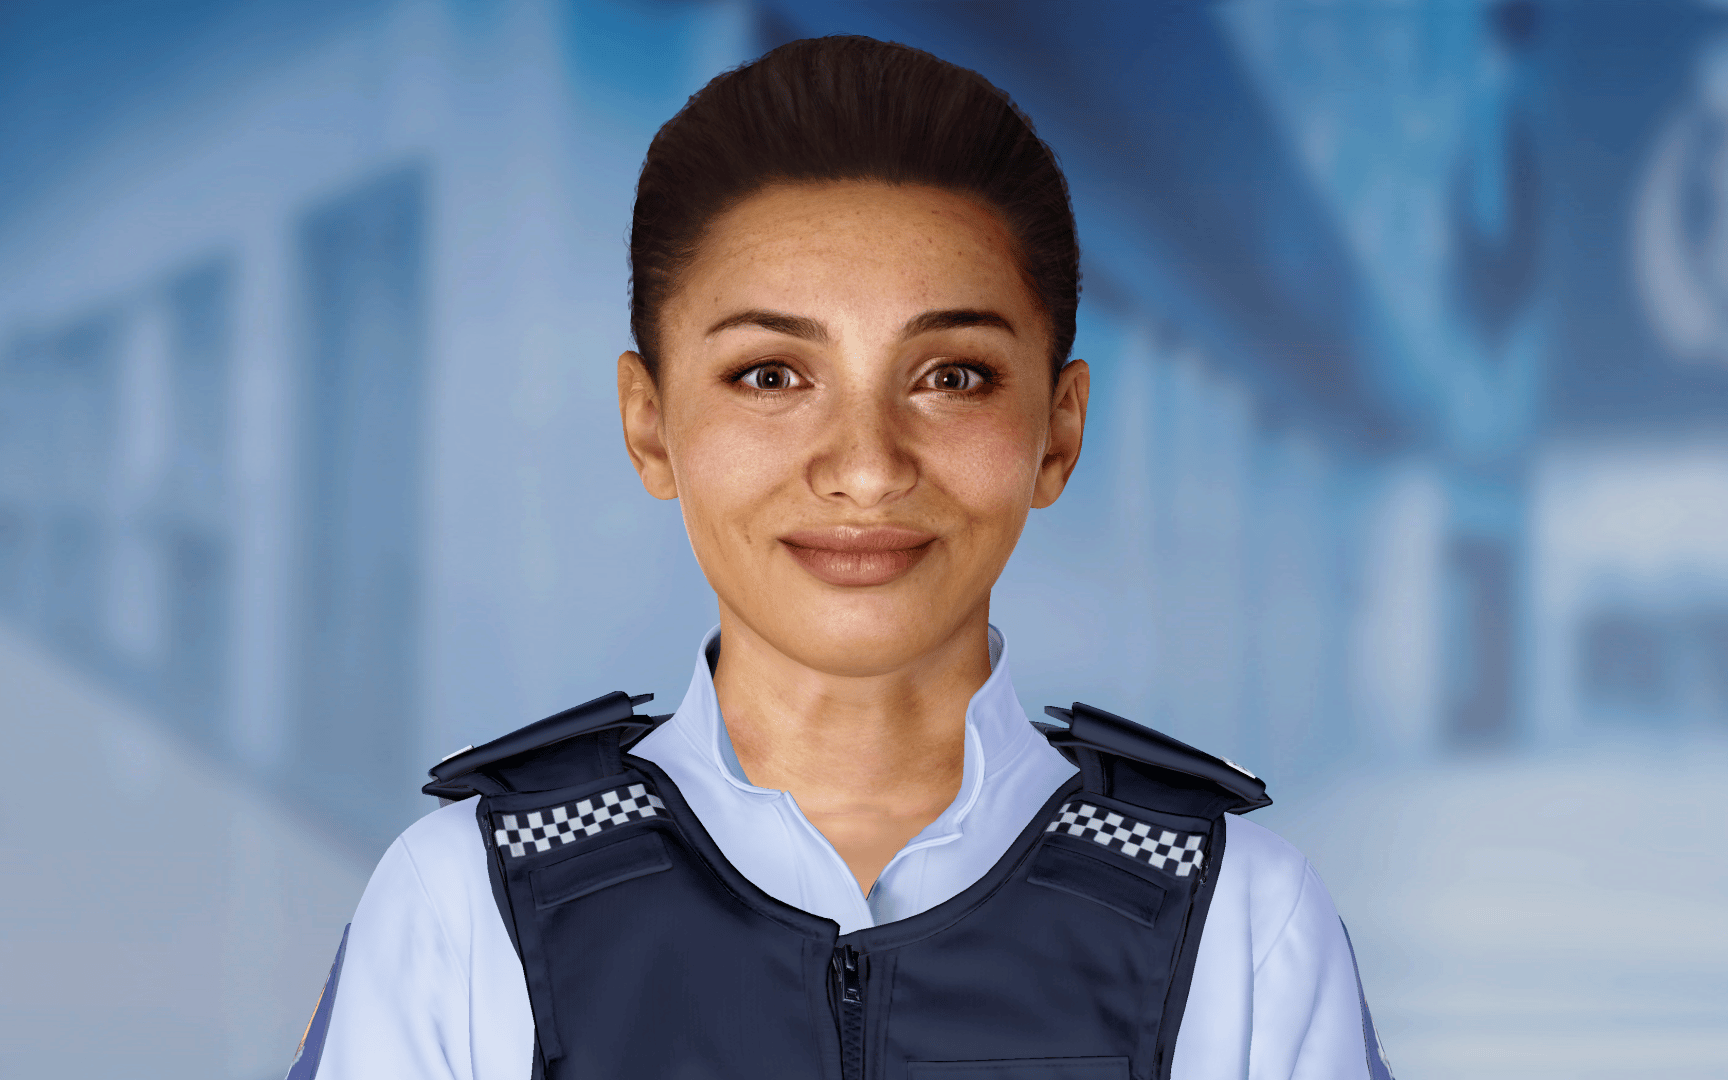 The First AI Police Officer Reports On Duty: New Zealand